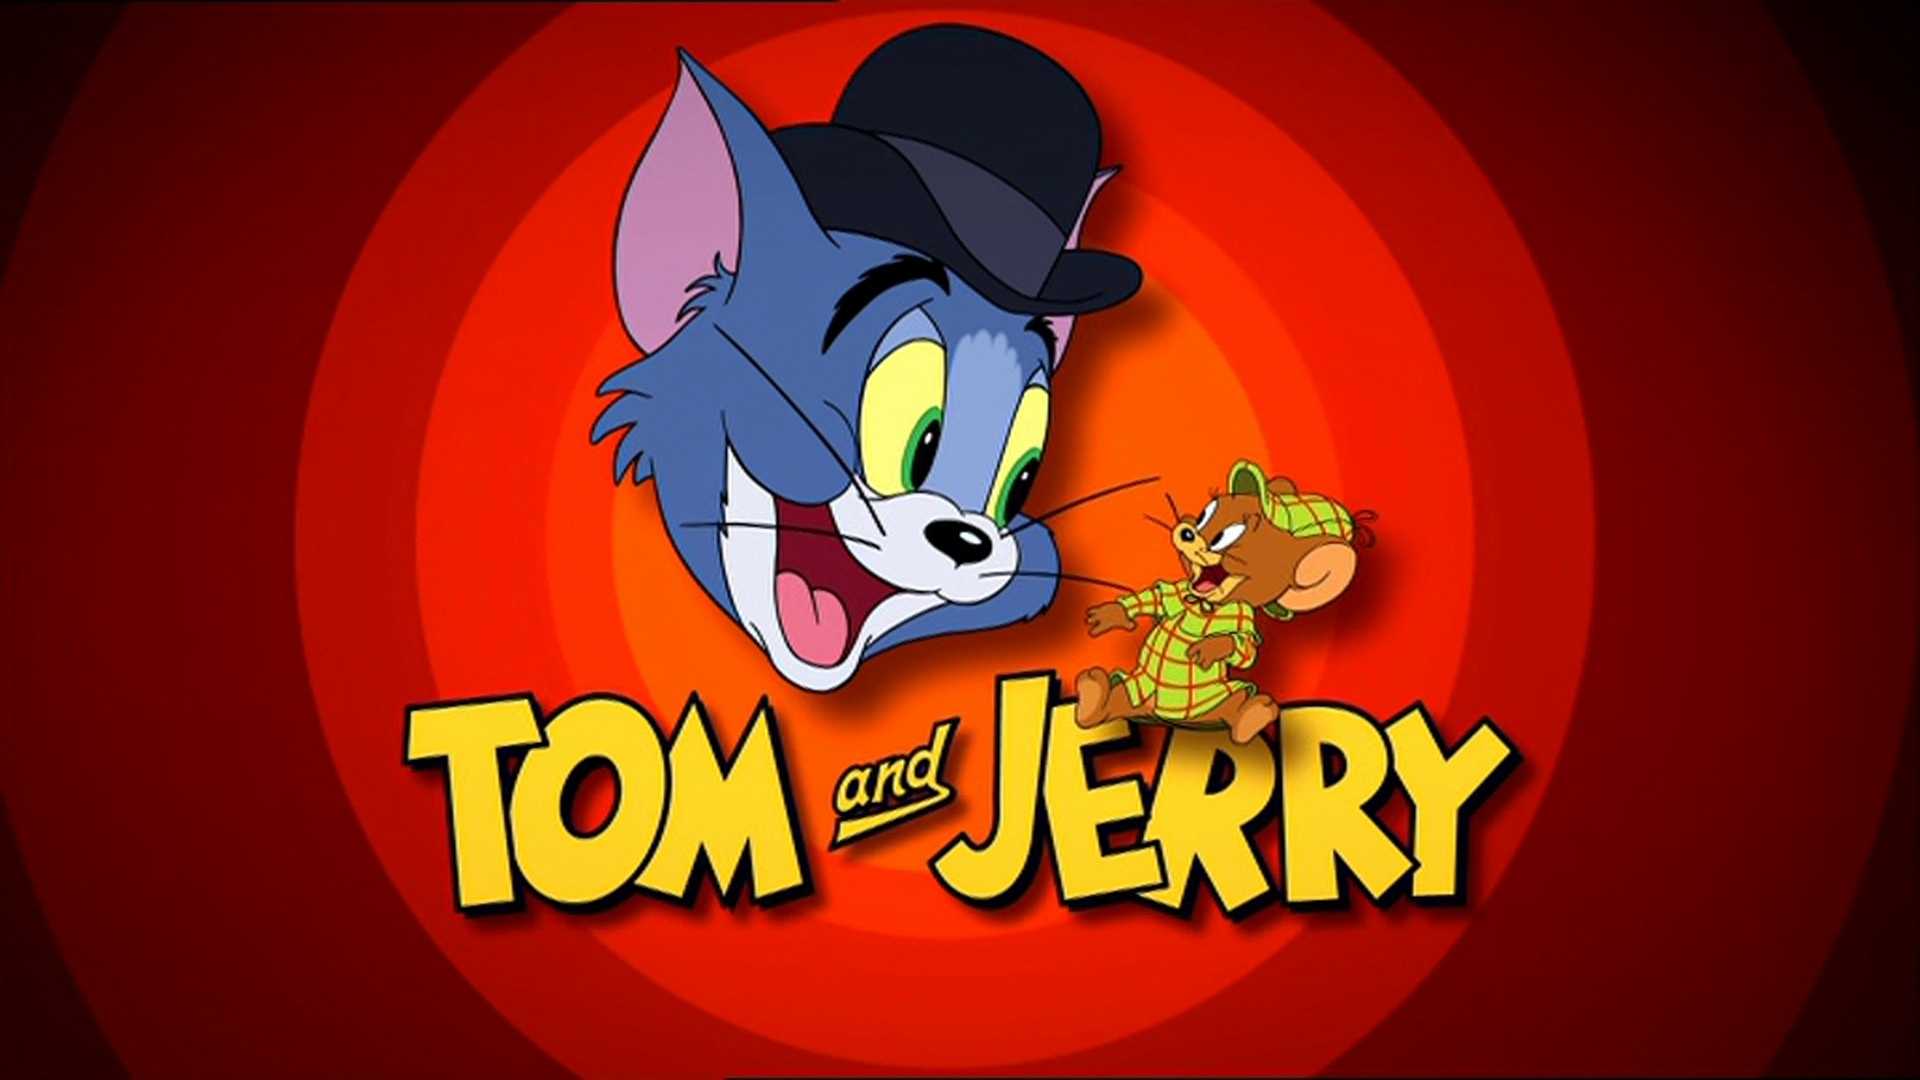 HD Tom and Jerry Wallpaper 1